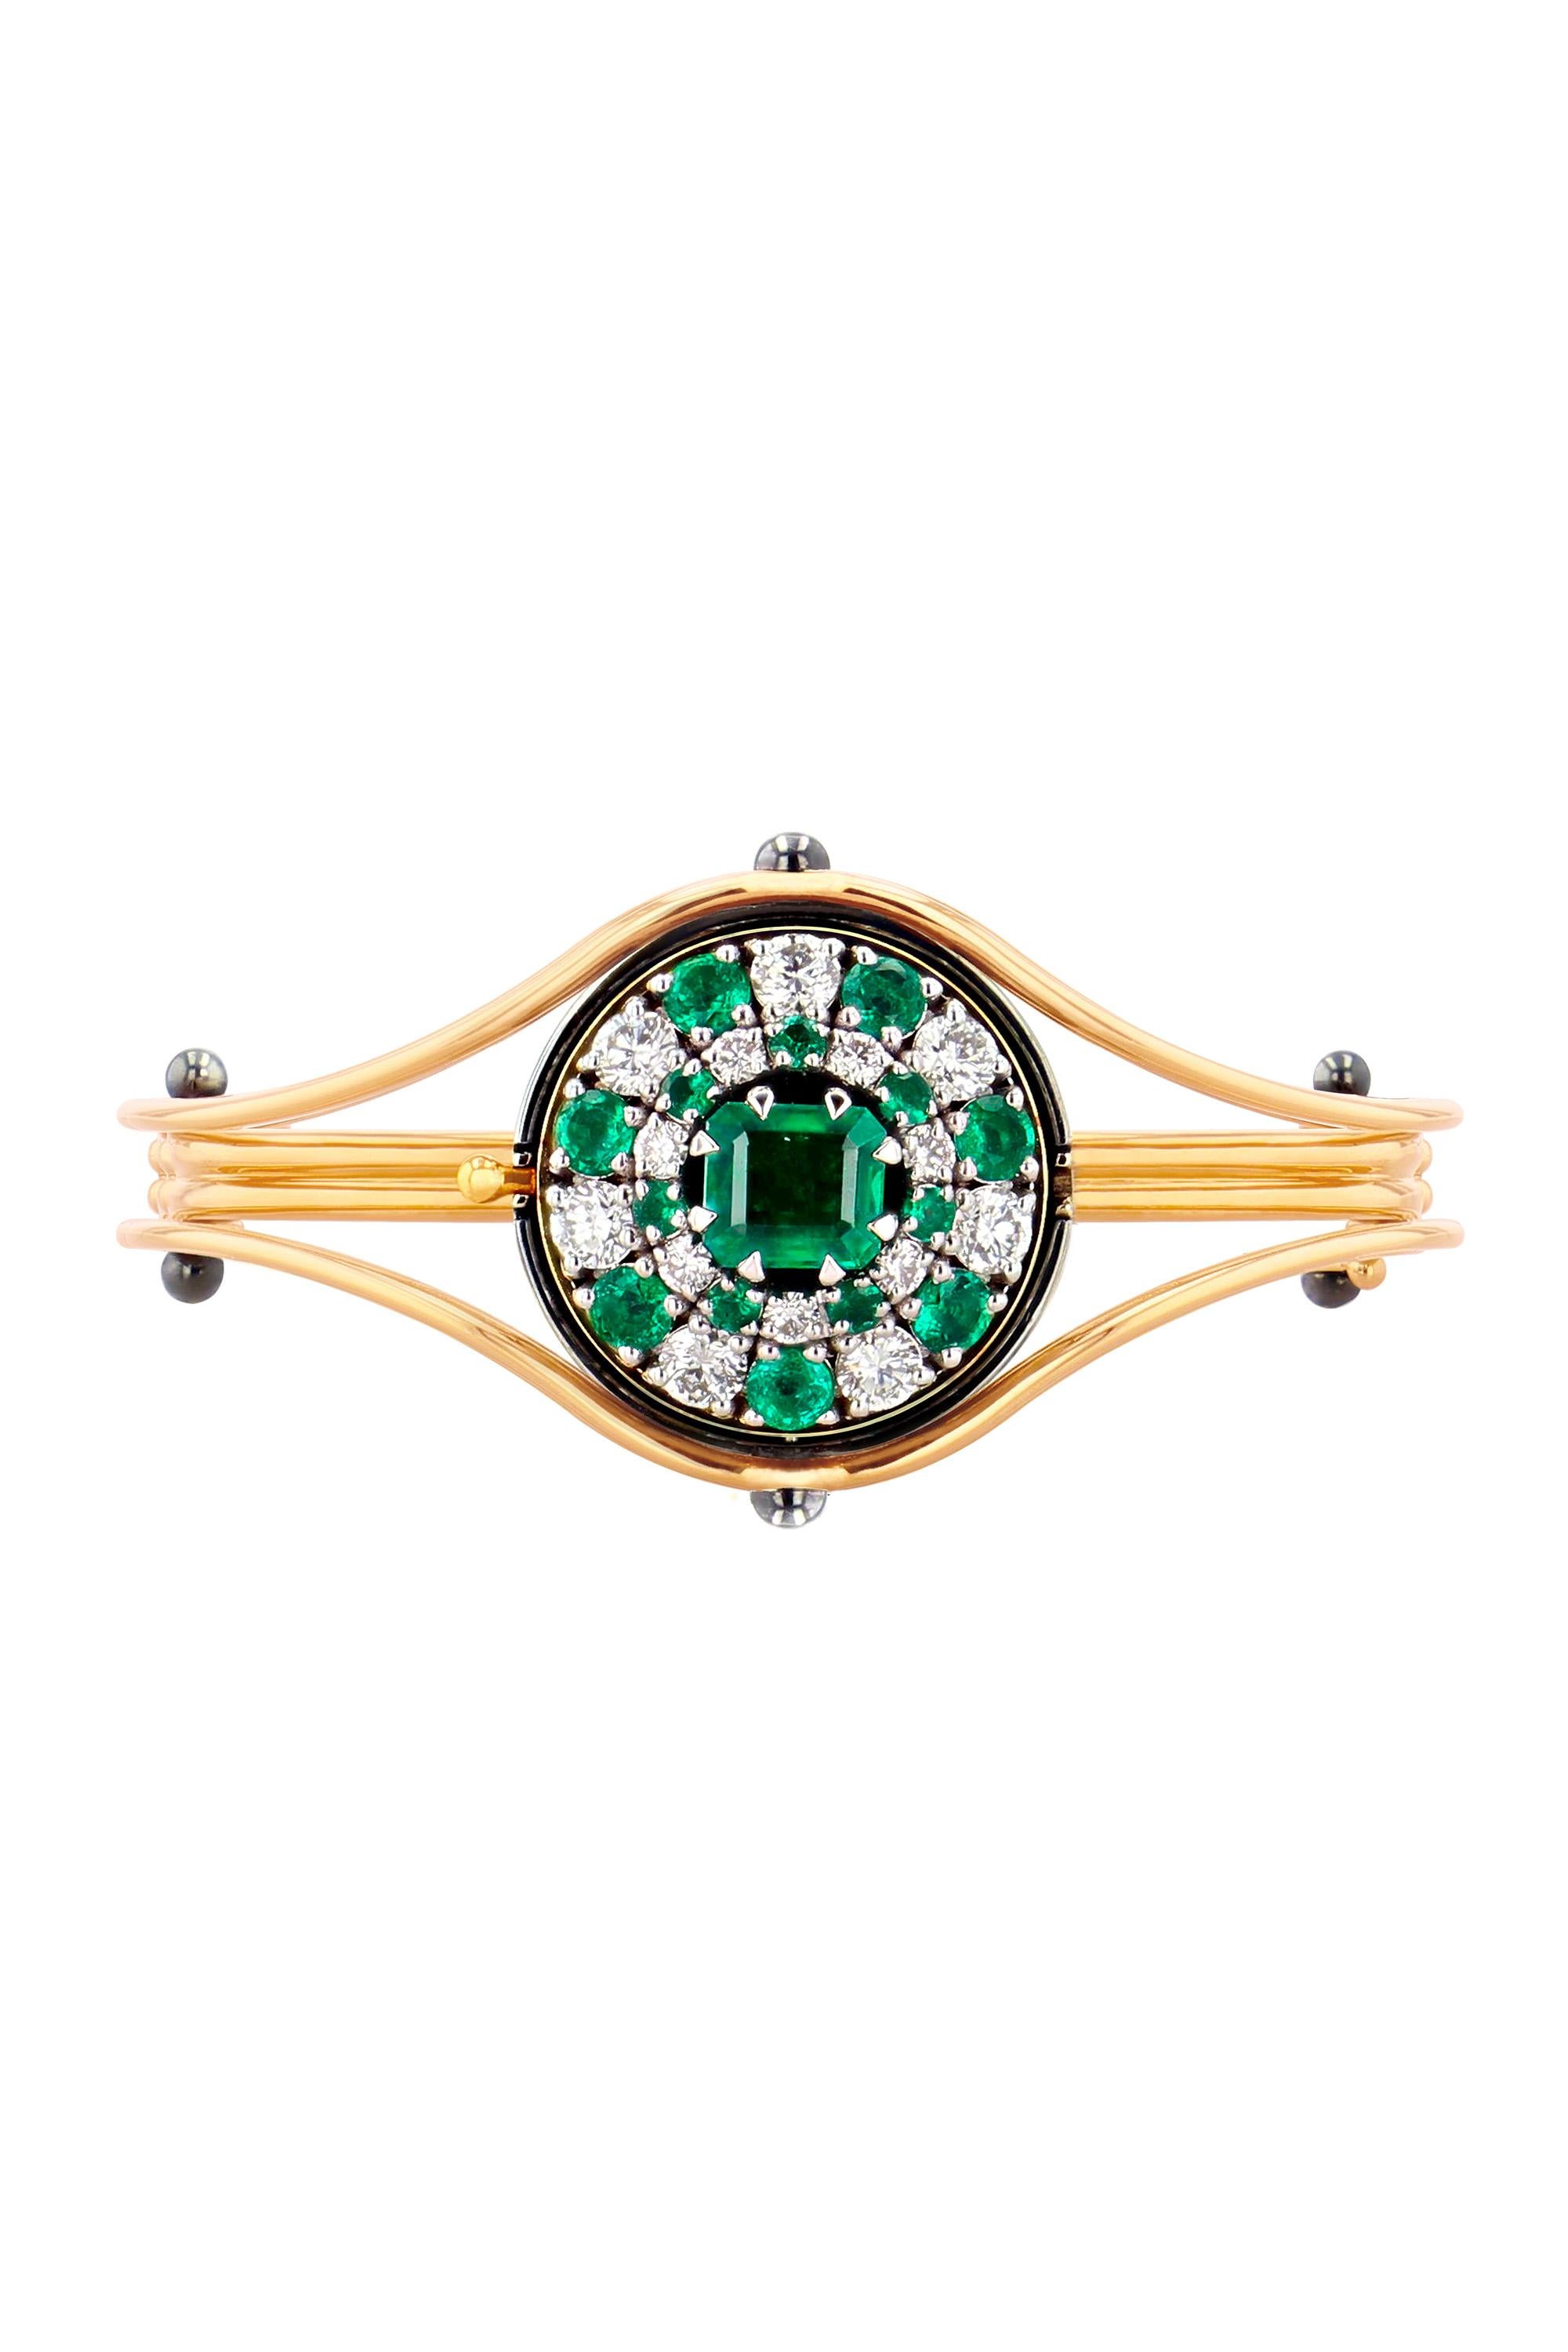 Gold and distressed silver bracelet. Rotating sphere revealing an emerald surrounded by emeralds and diamonds.

Details: 
Central Emerald: 1.42 cts certified Zambia
Emeralds: 1.1 cts
Diamonds: 1.33 cts
18k Yellow Gold: 32 g
Distressed Silver: 7